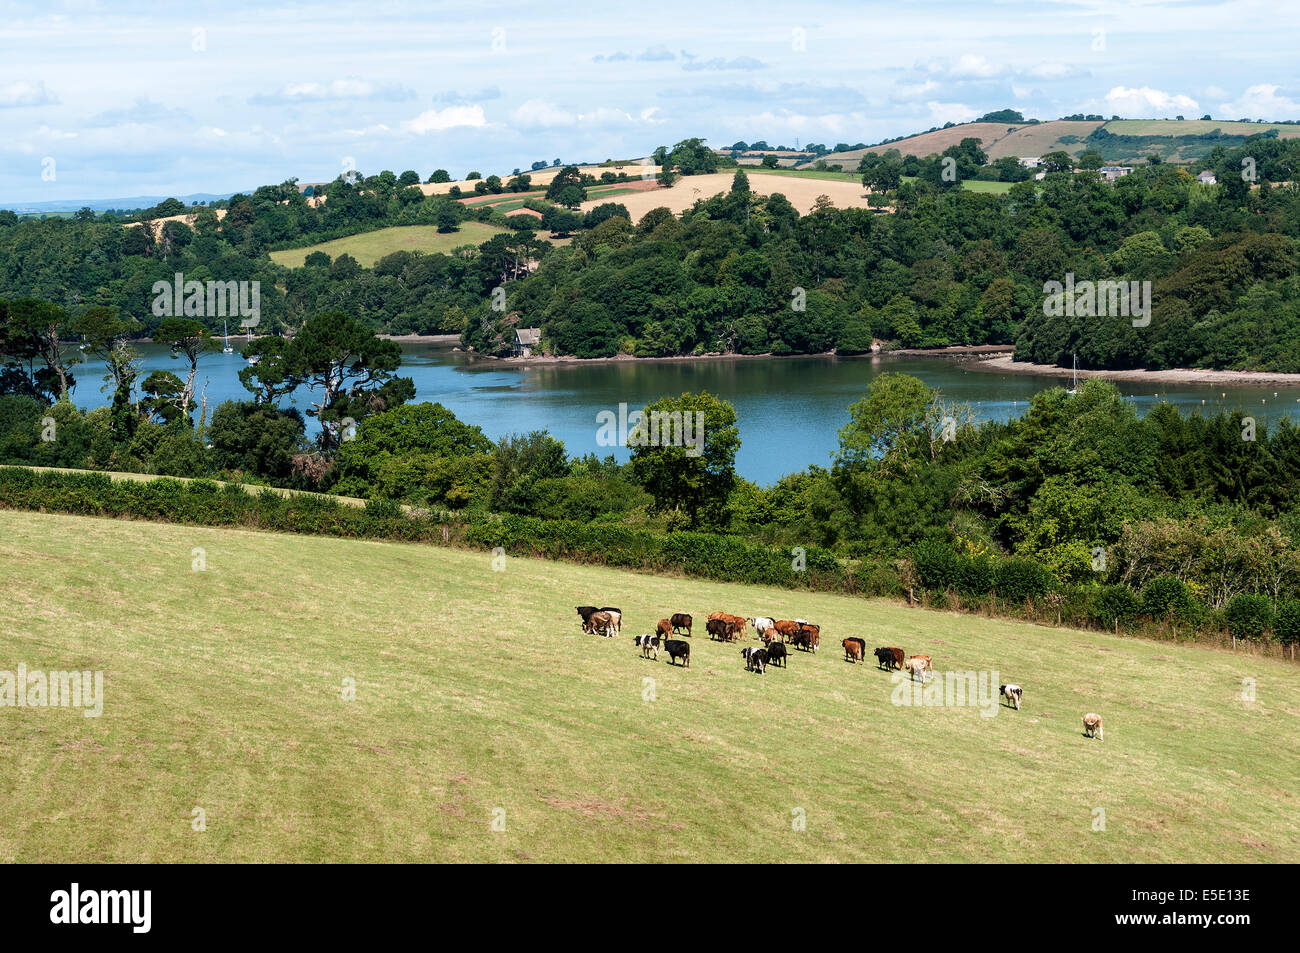 cows in fields at greenway,Agatha christie,river Dart Stock Photo